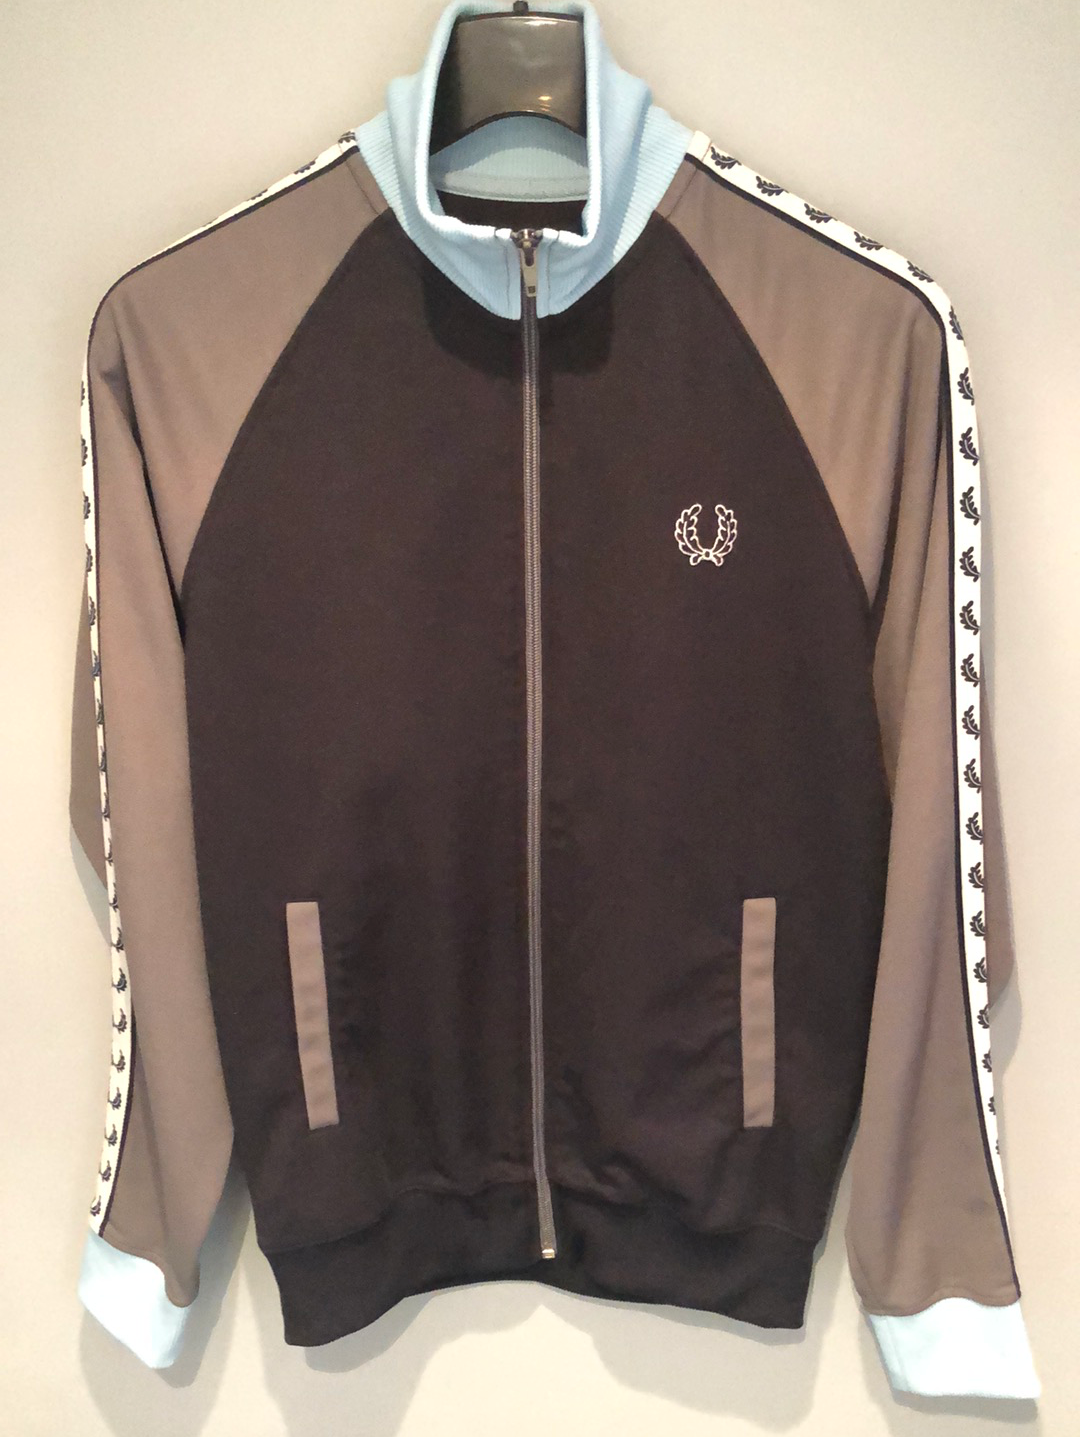 Fred Perry Sportswear Tracksuit Top Grey, Navy and Blue with Logo Strip on Arms - Size S - MOD Clothing Sportswear - Urban Vintage Clothing